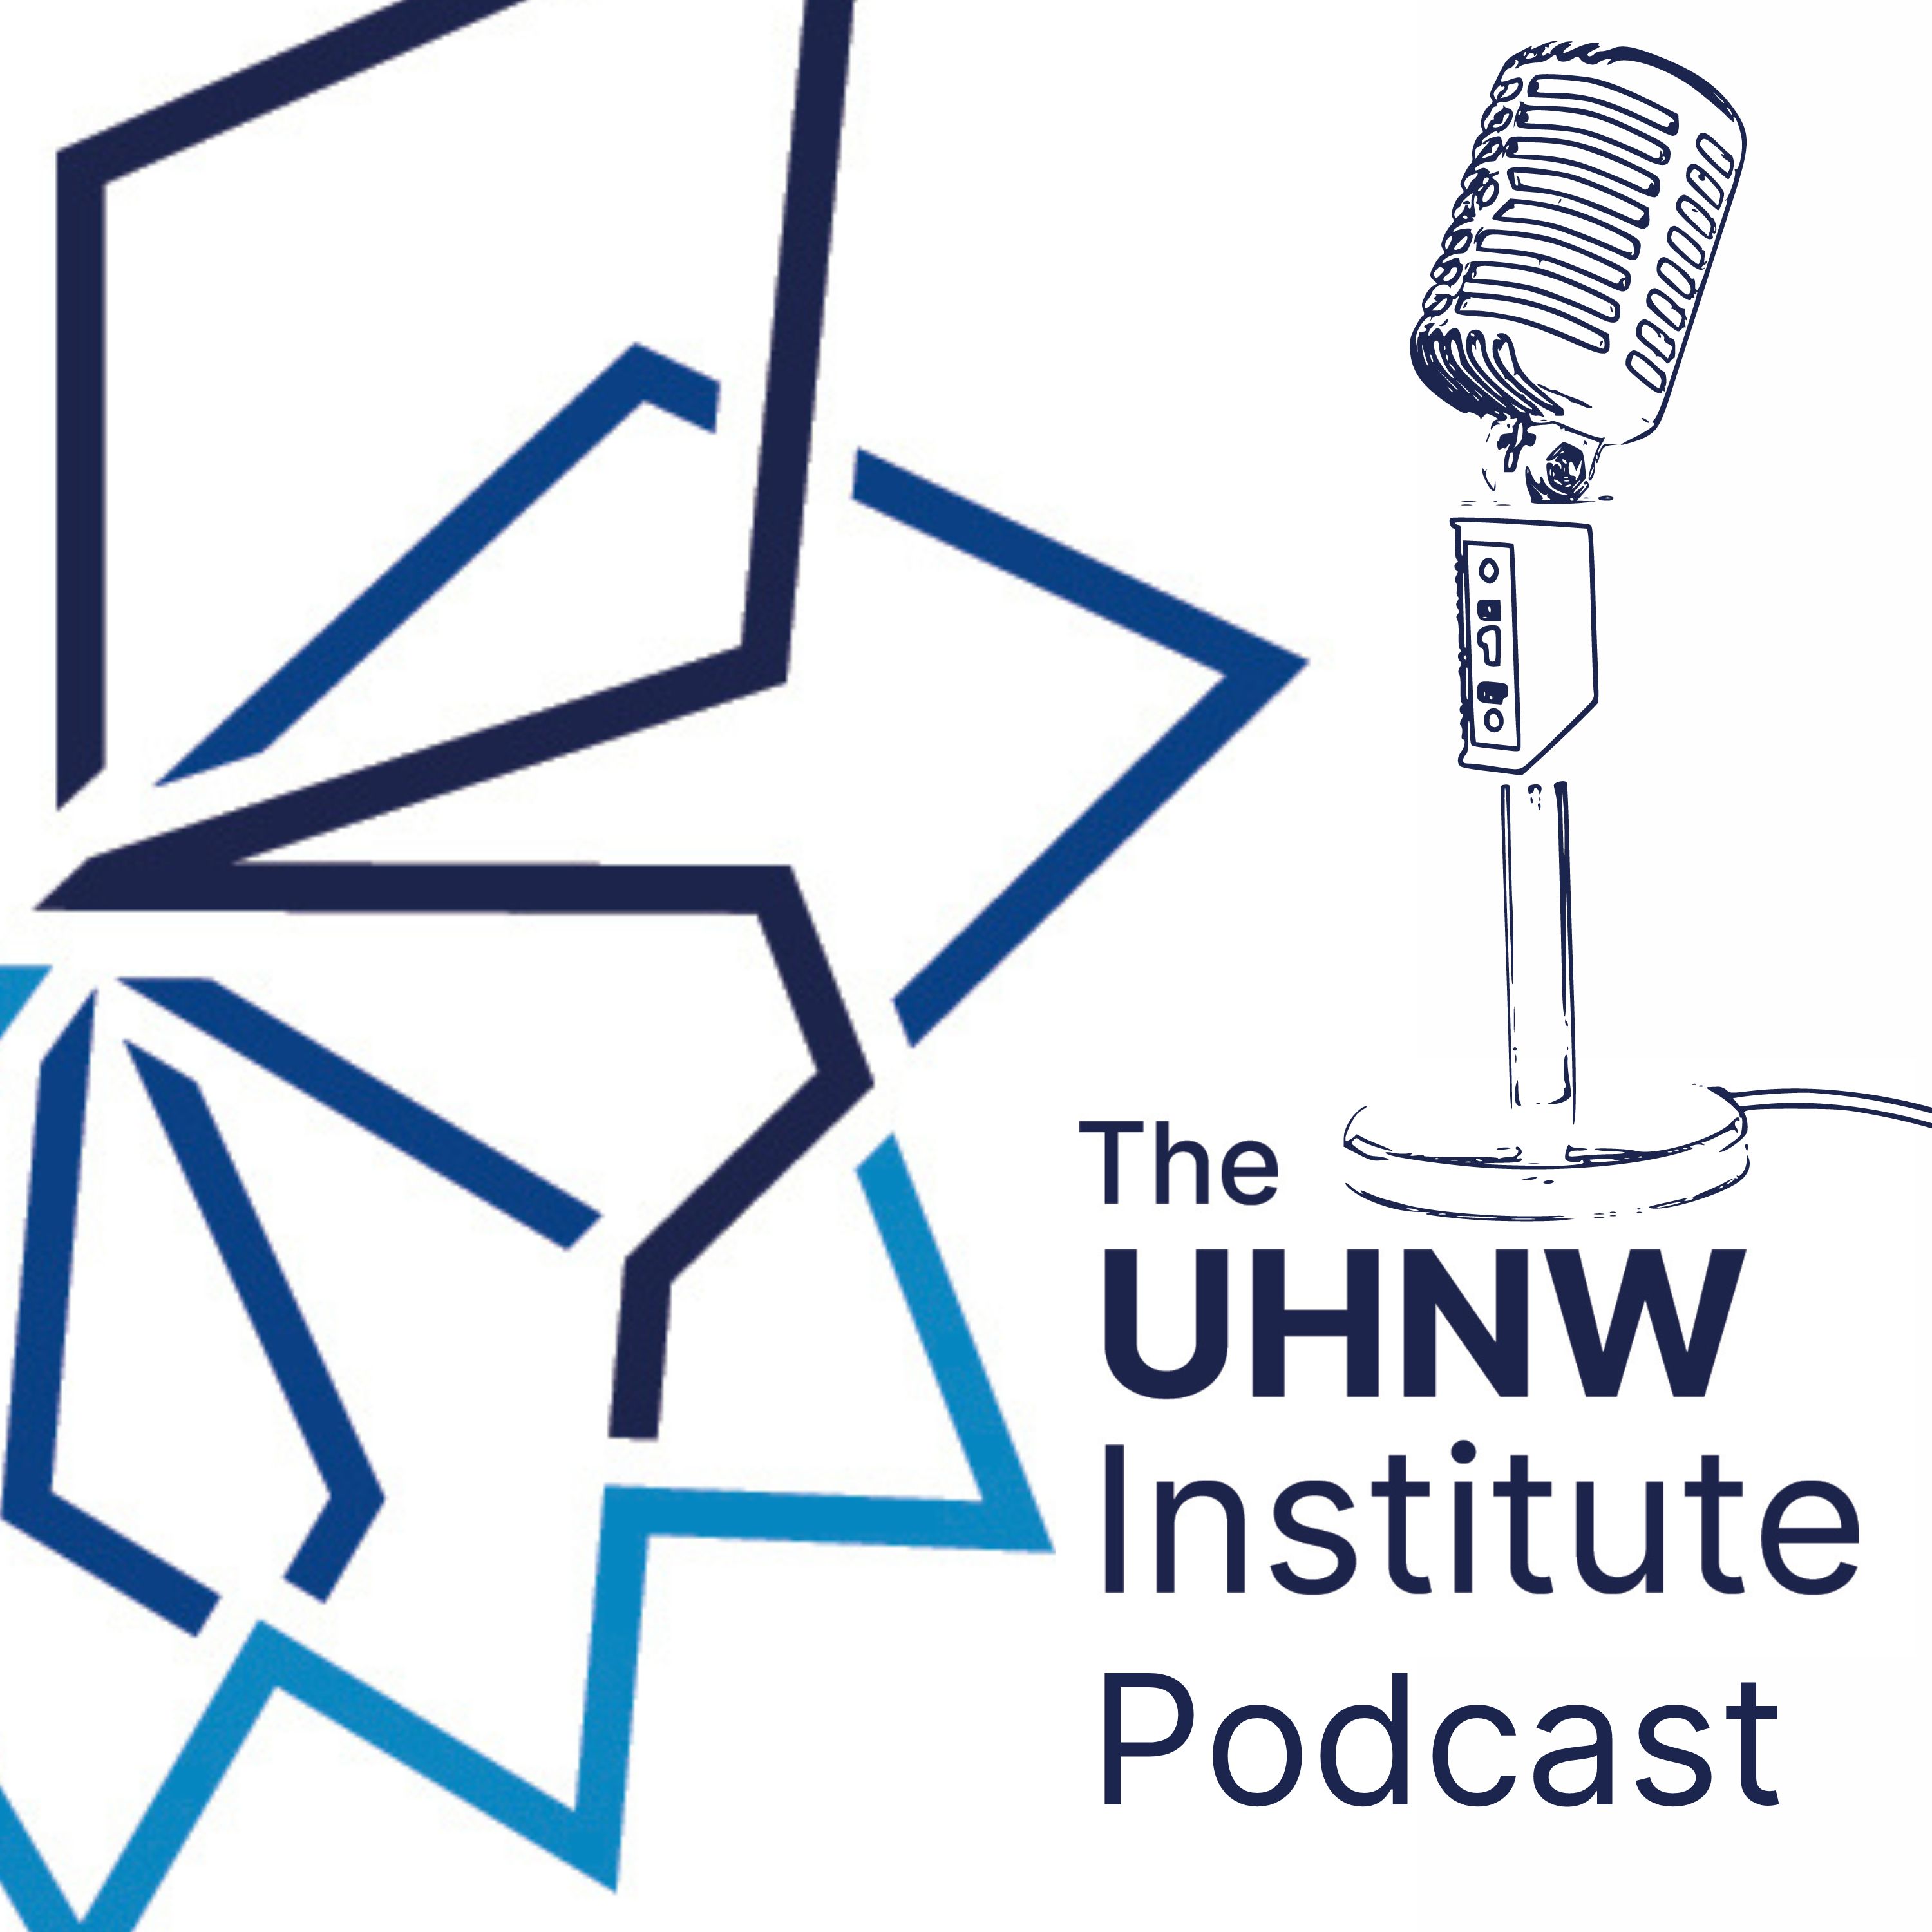 The UHNW Institute Podcast